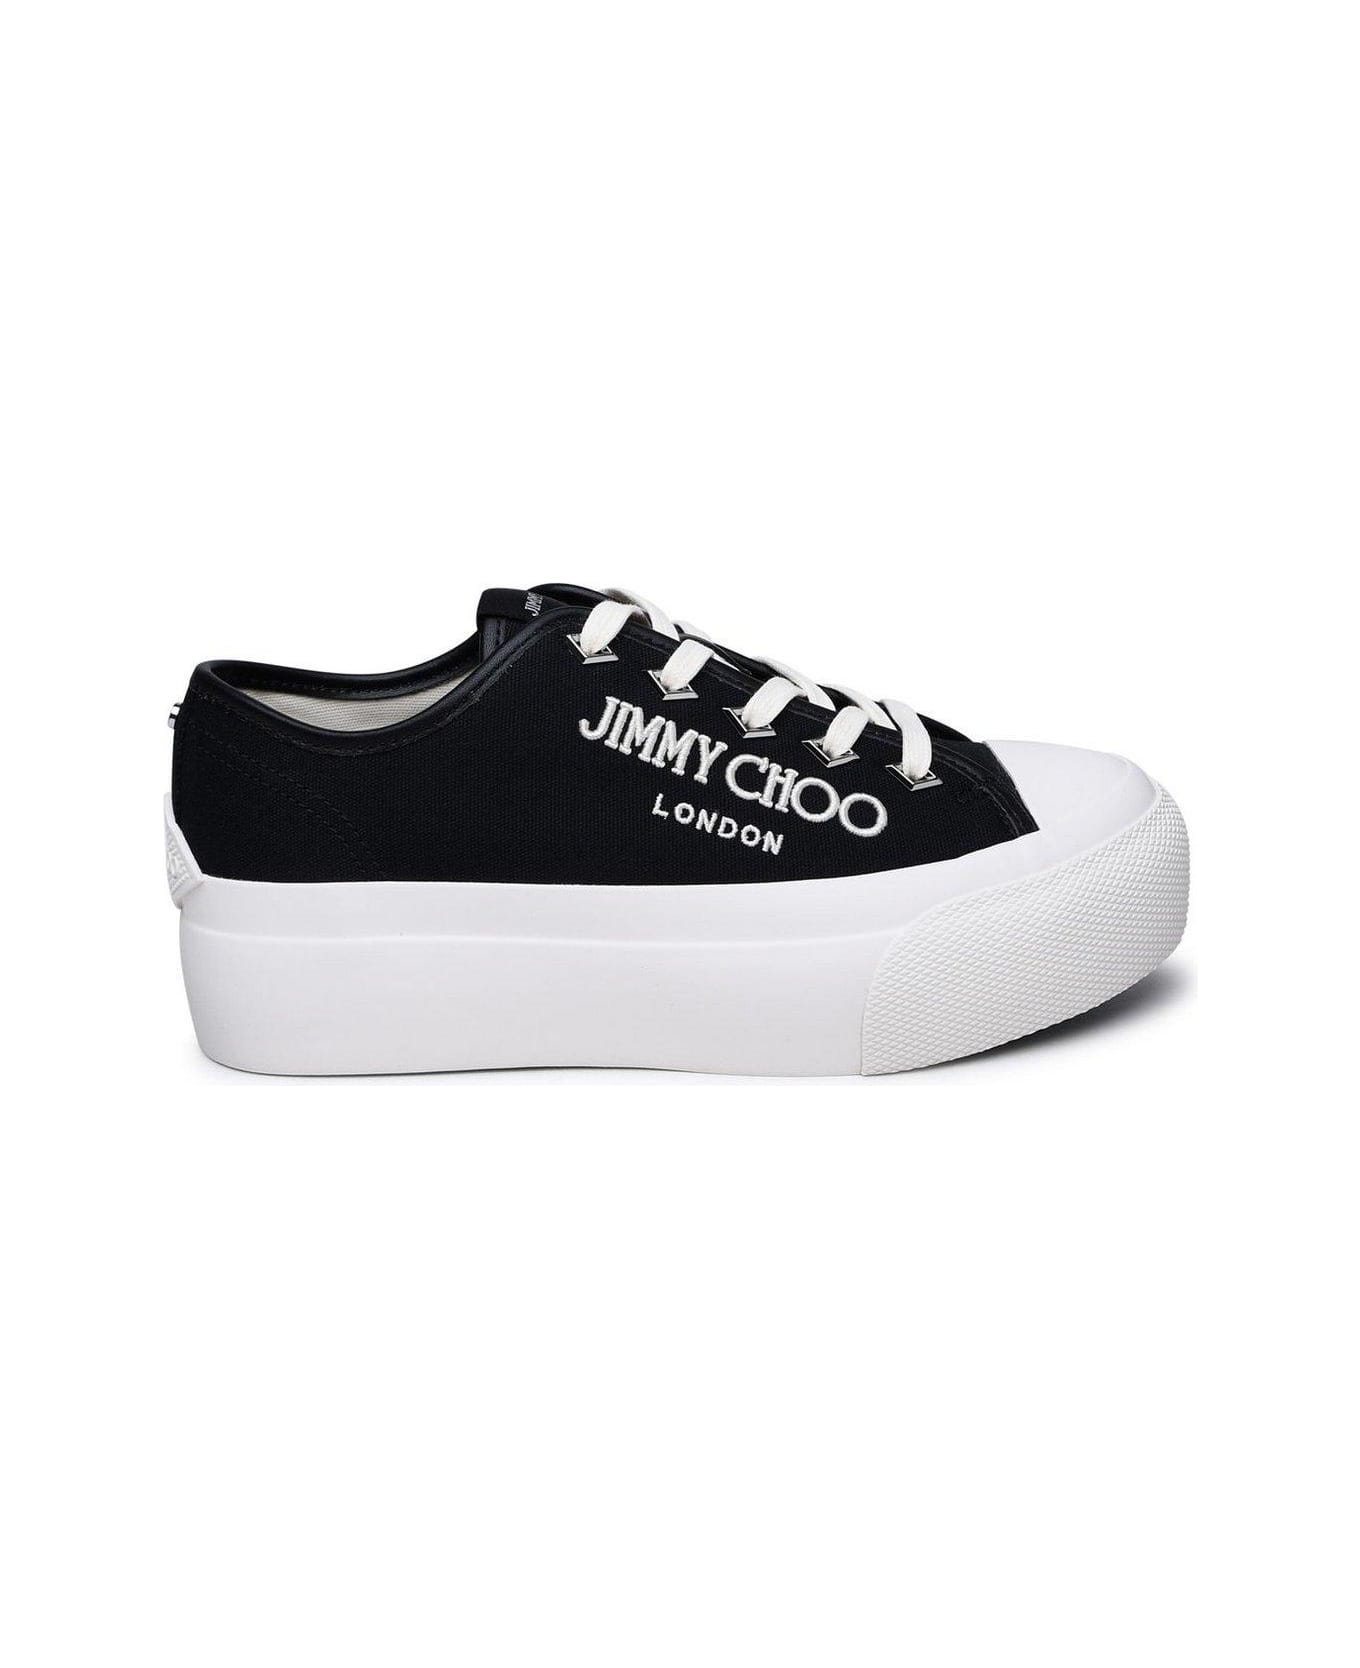 Jimmy Choo Logo Embroidered Platform Lace-up Sneakers - Black